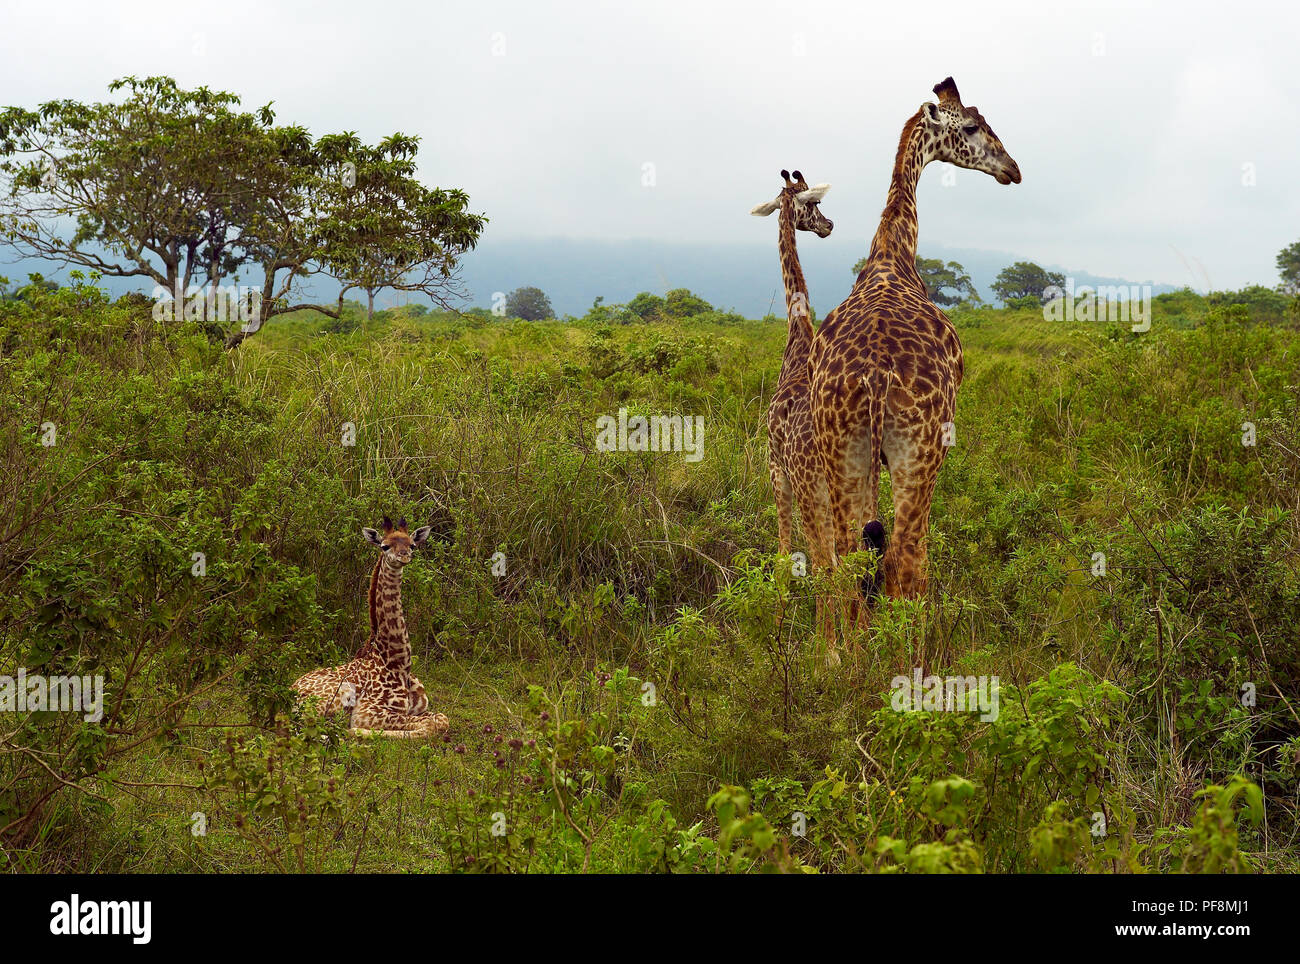 Funny Adult and Baby Giraffes among Green Vegetation in Arusha National Park, Tanzania Stock Photo